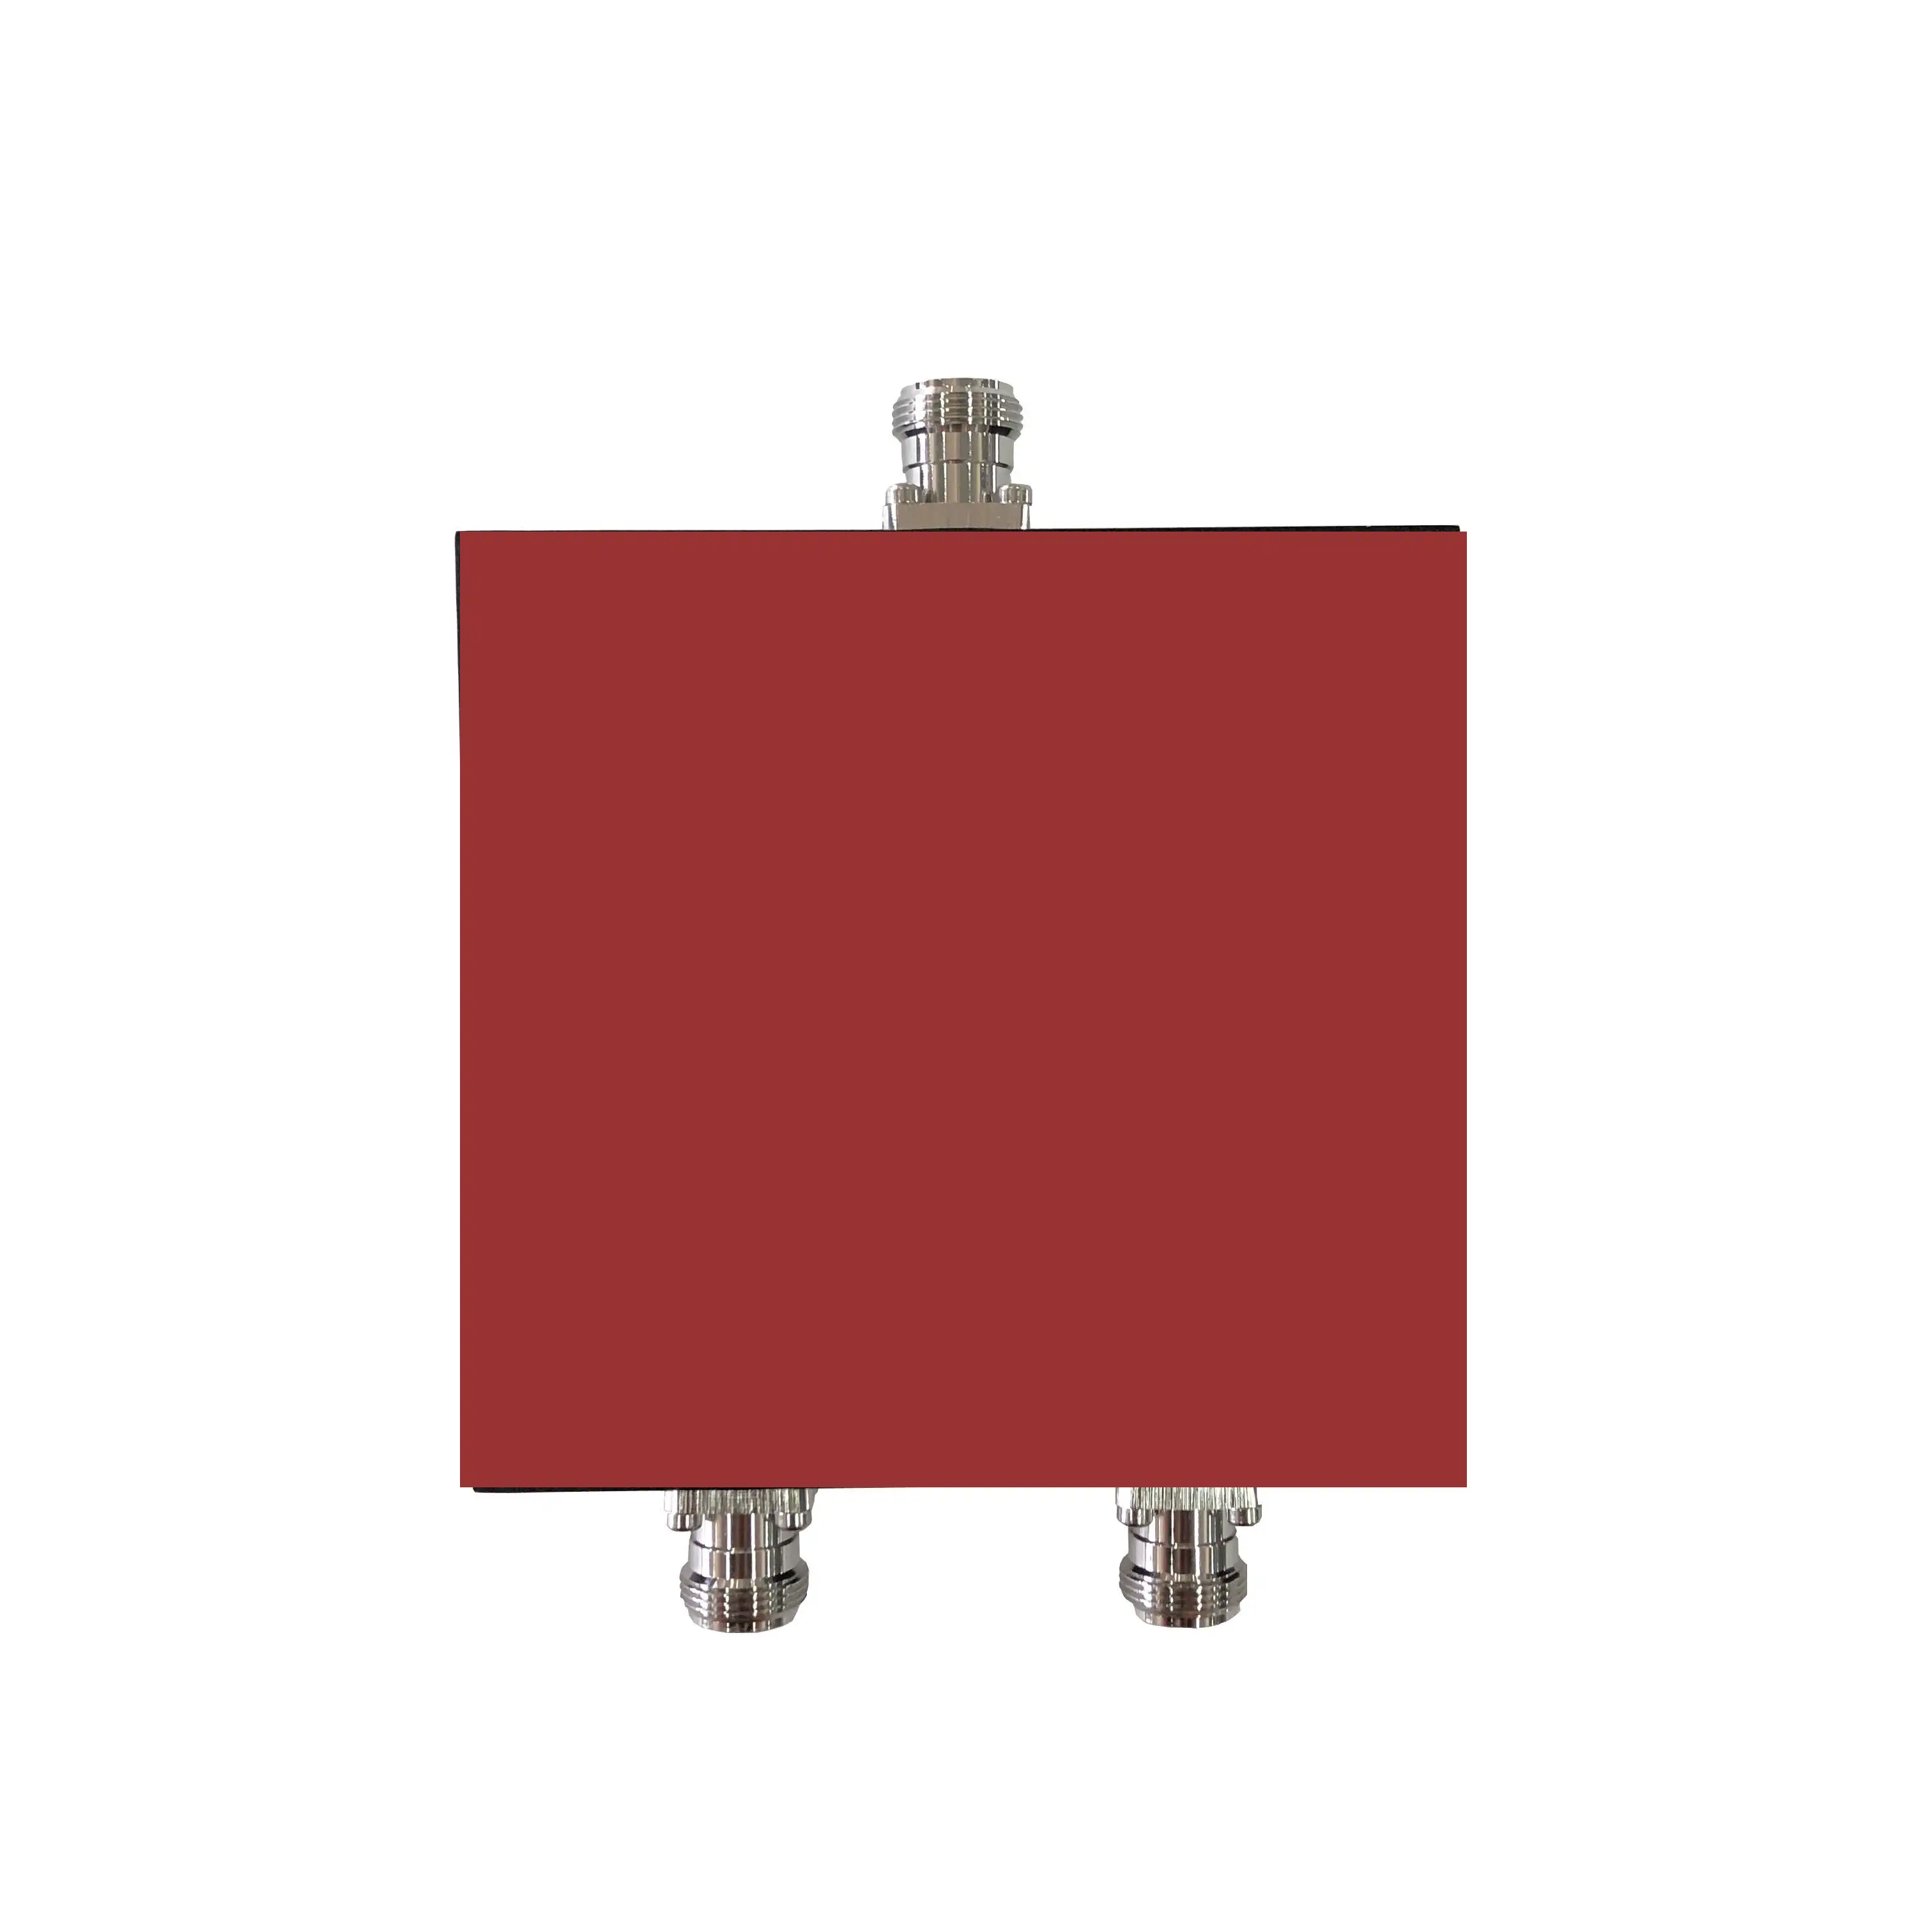 Public Safety components 2 way power divider 138-960MHz